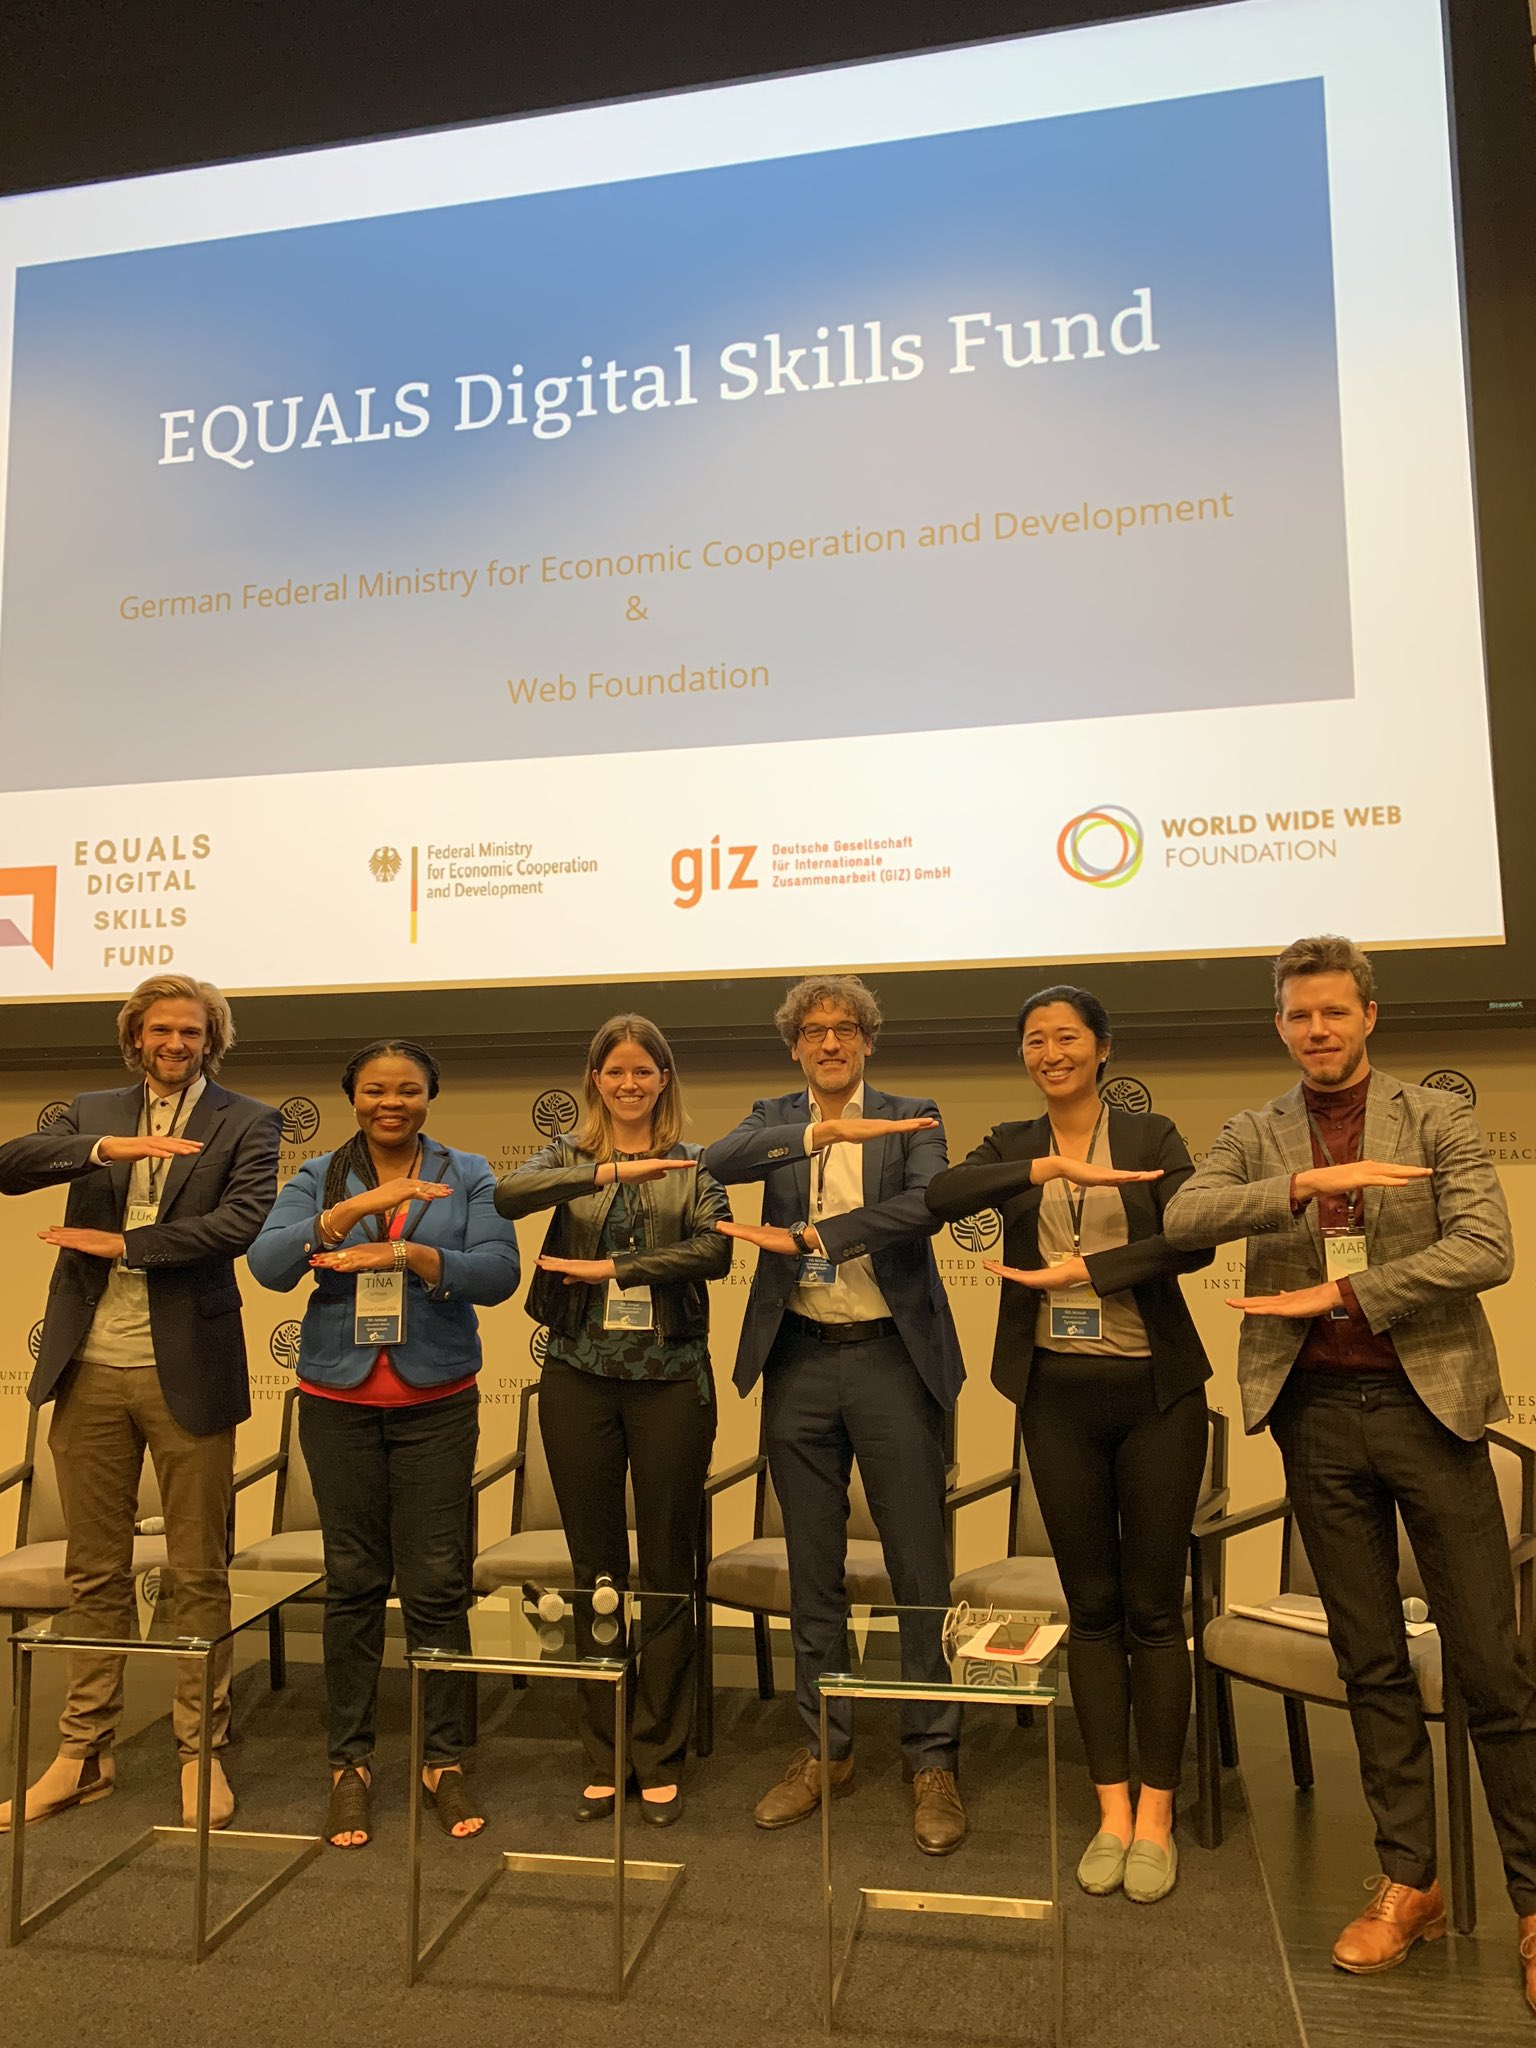 Group photo from the EQUALS Digital Skill Fund launch event